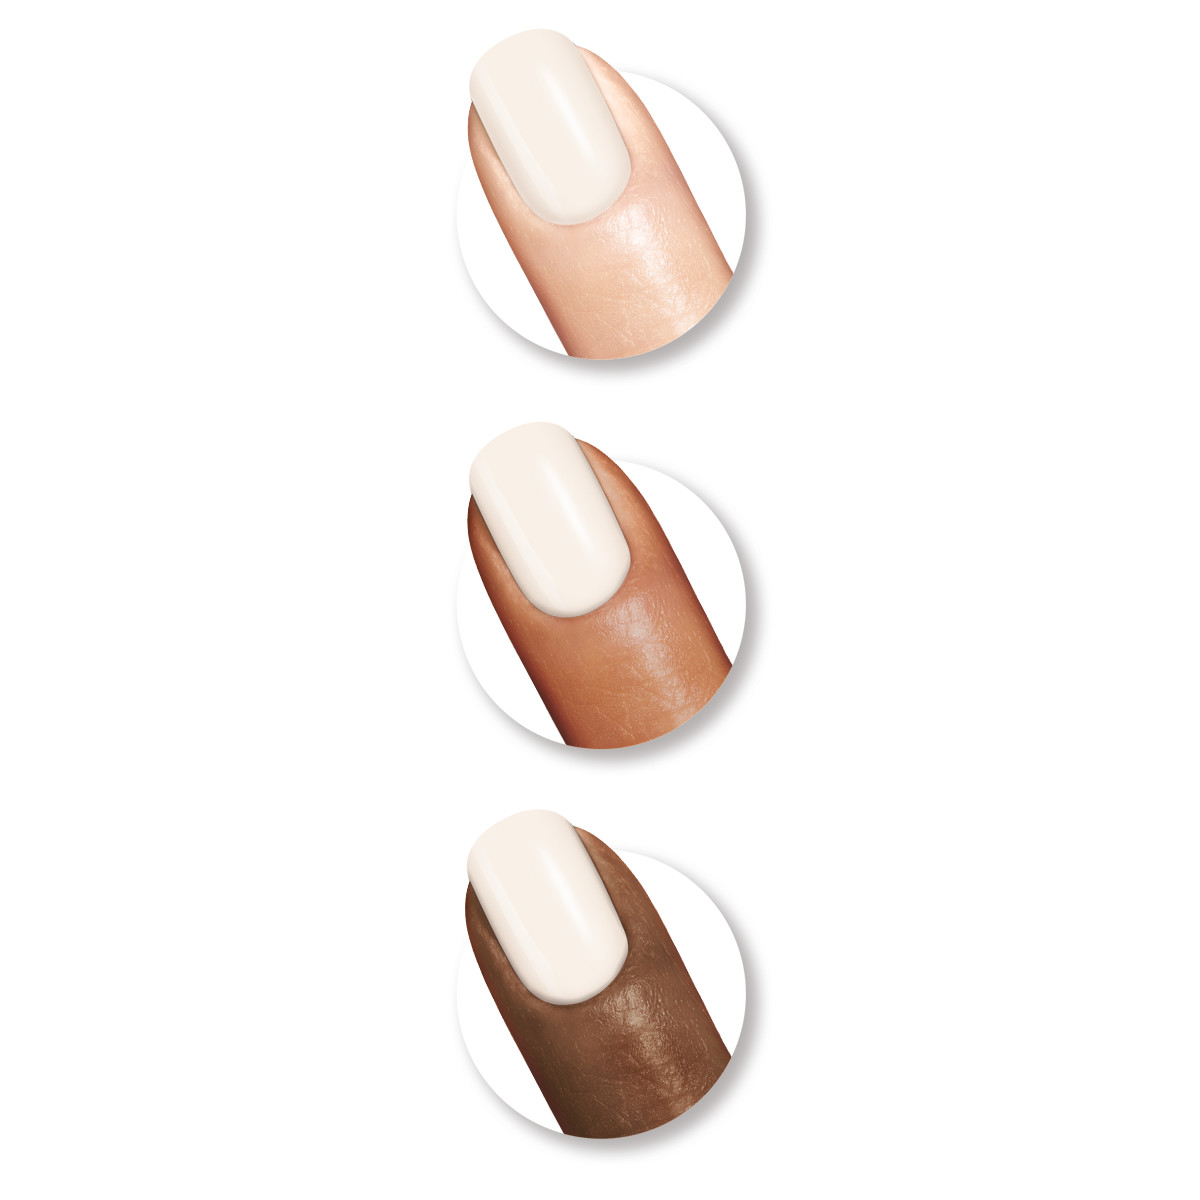 Sally Hansen Complete Salon Manicure Nail Color, Shell We Dance? - image 3 of 3